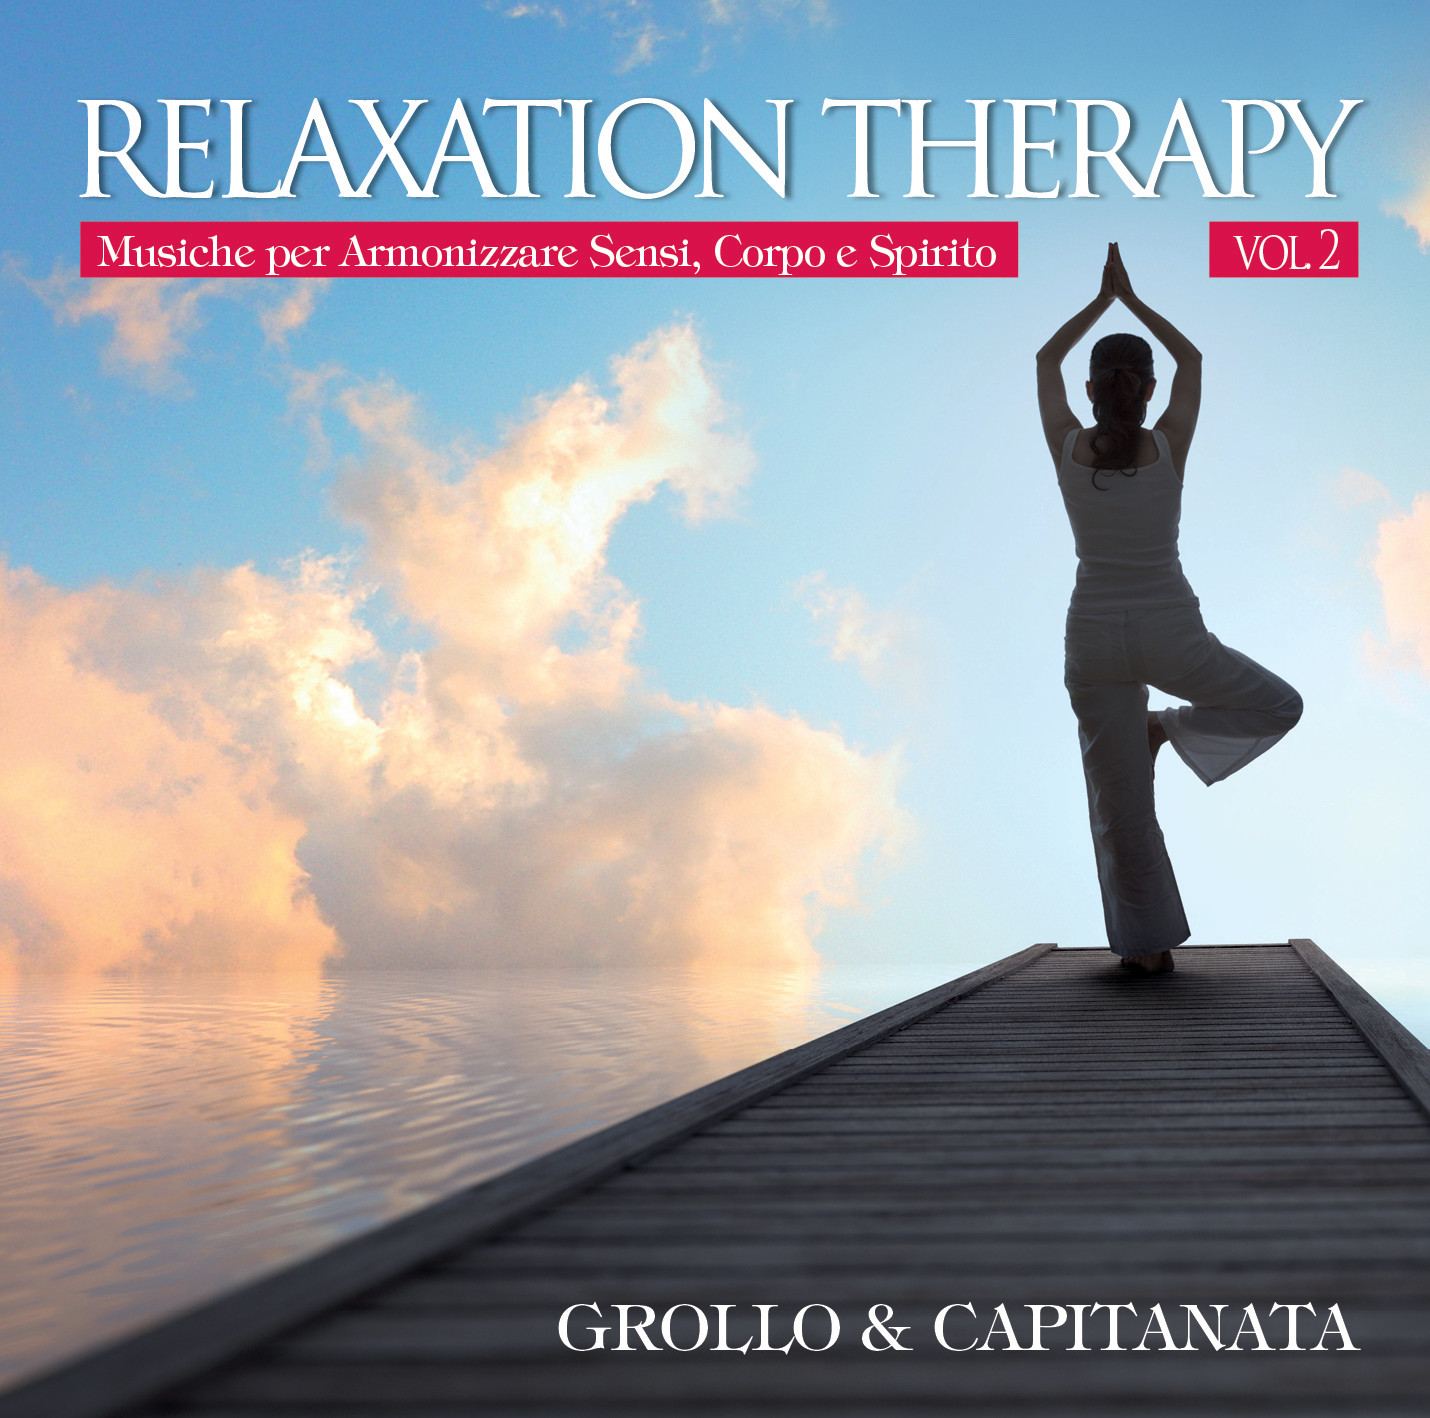 Relaxation Therapy Vol. 2